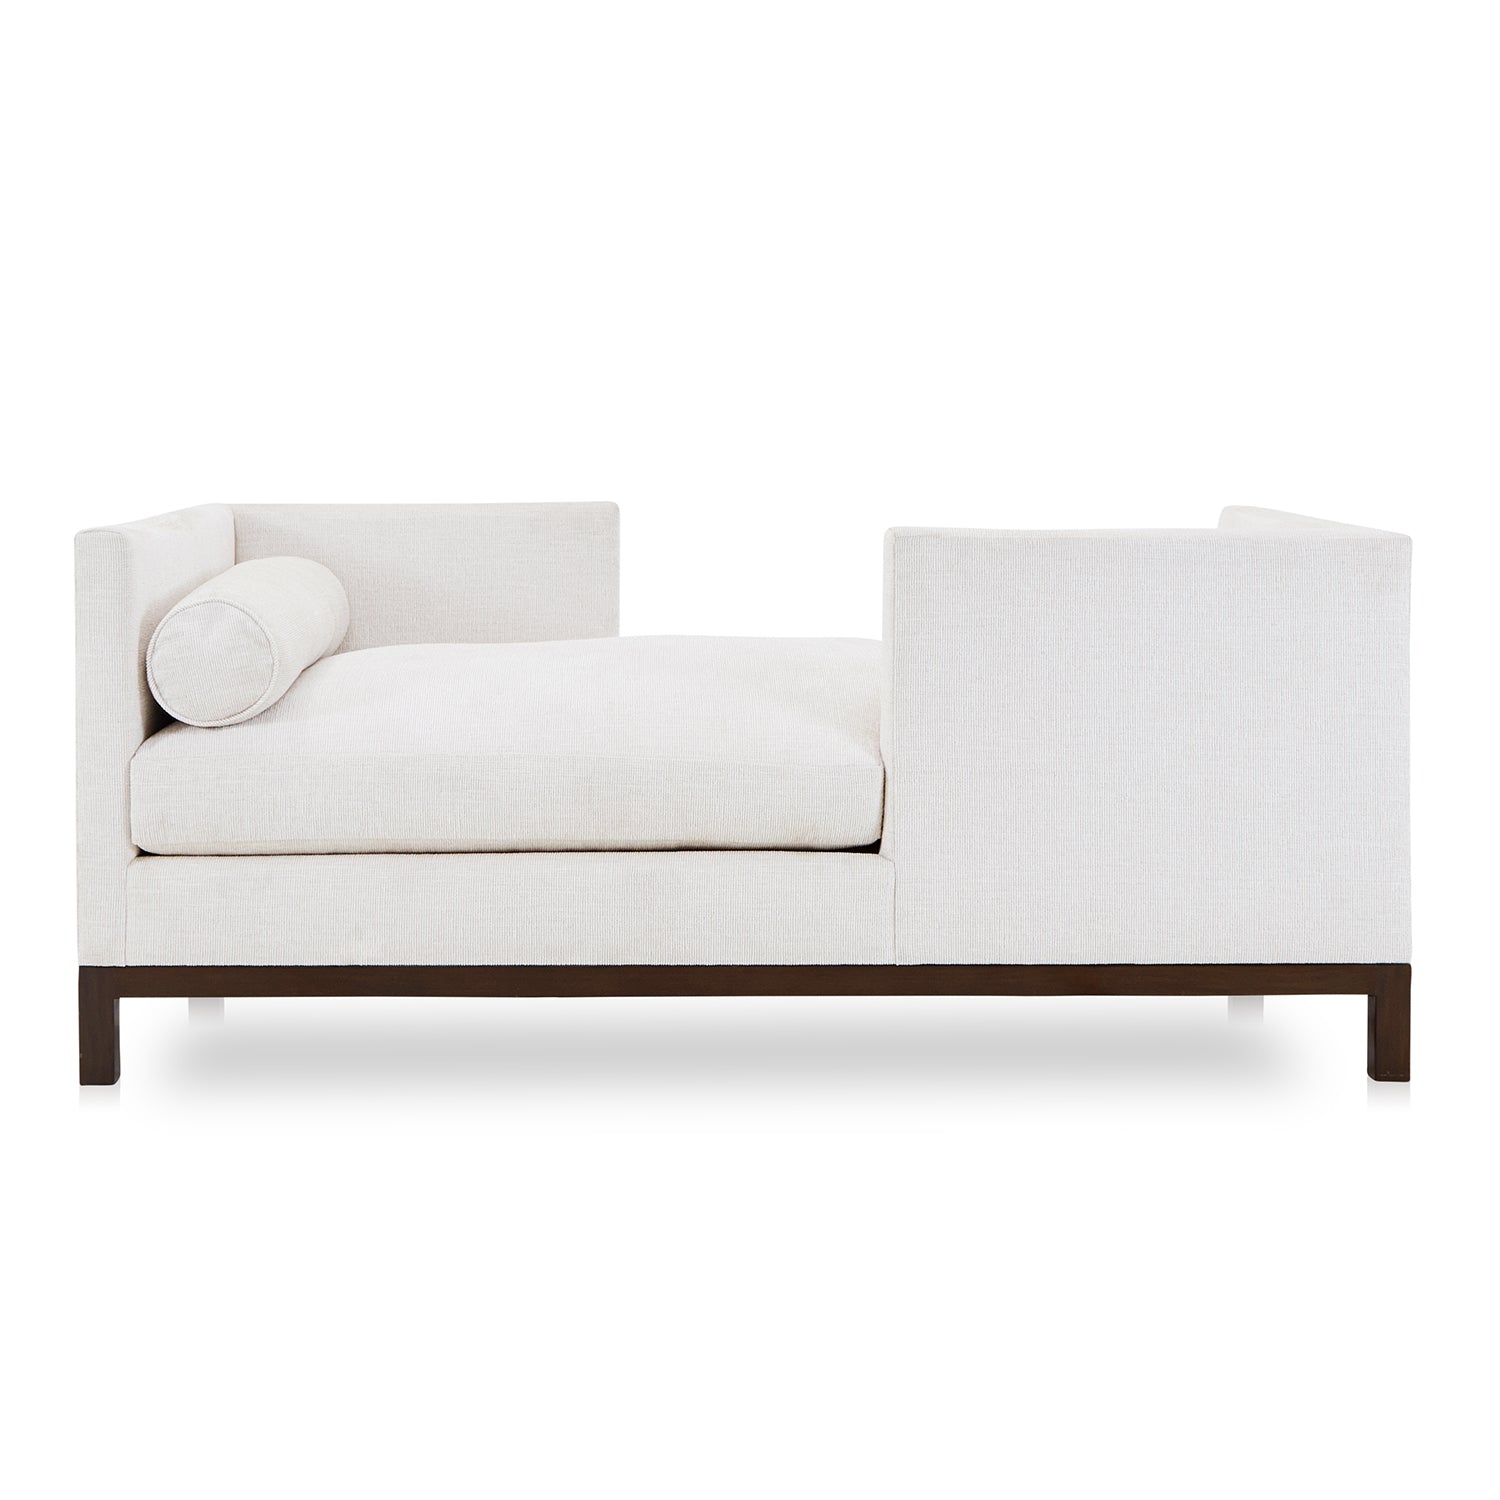 Cream Textured Fabric Double-Sided Props & Roy Gil - Sofa